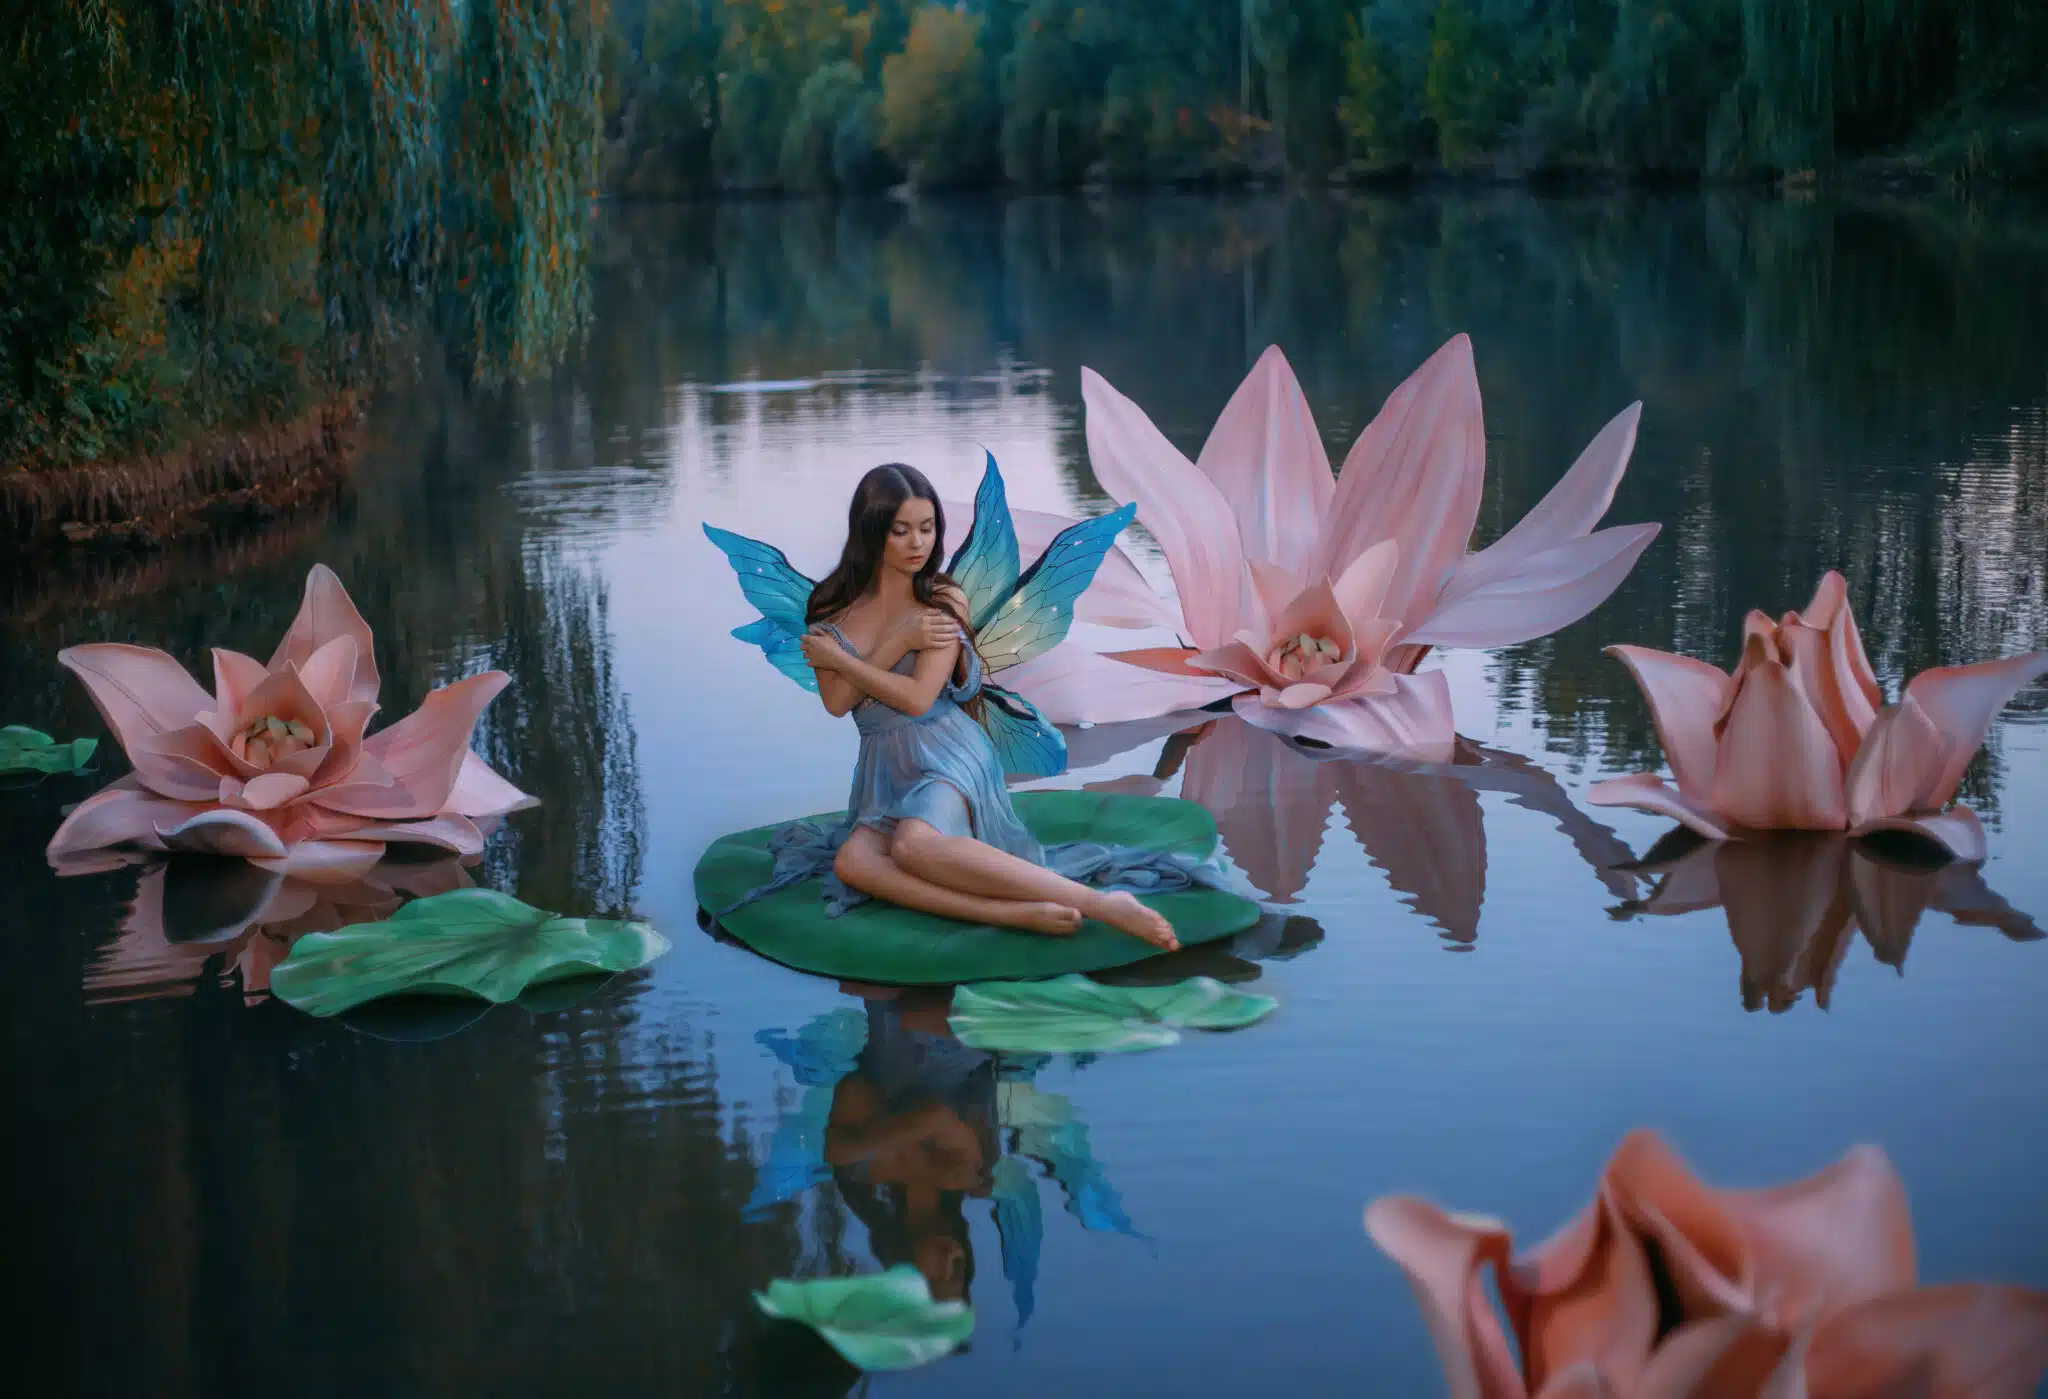 A beautiful woman a little fabulous fairy with butterfly wings sits on green water lily leaf. Fantasy scenery of huge pink flowers on the lake, green trees. River nymph innocent girl in an blue dress